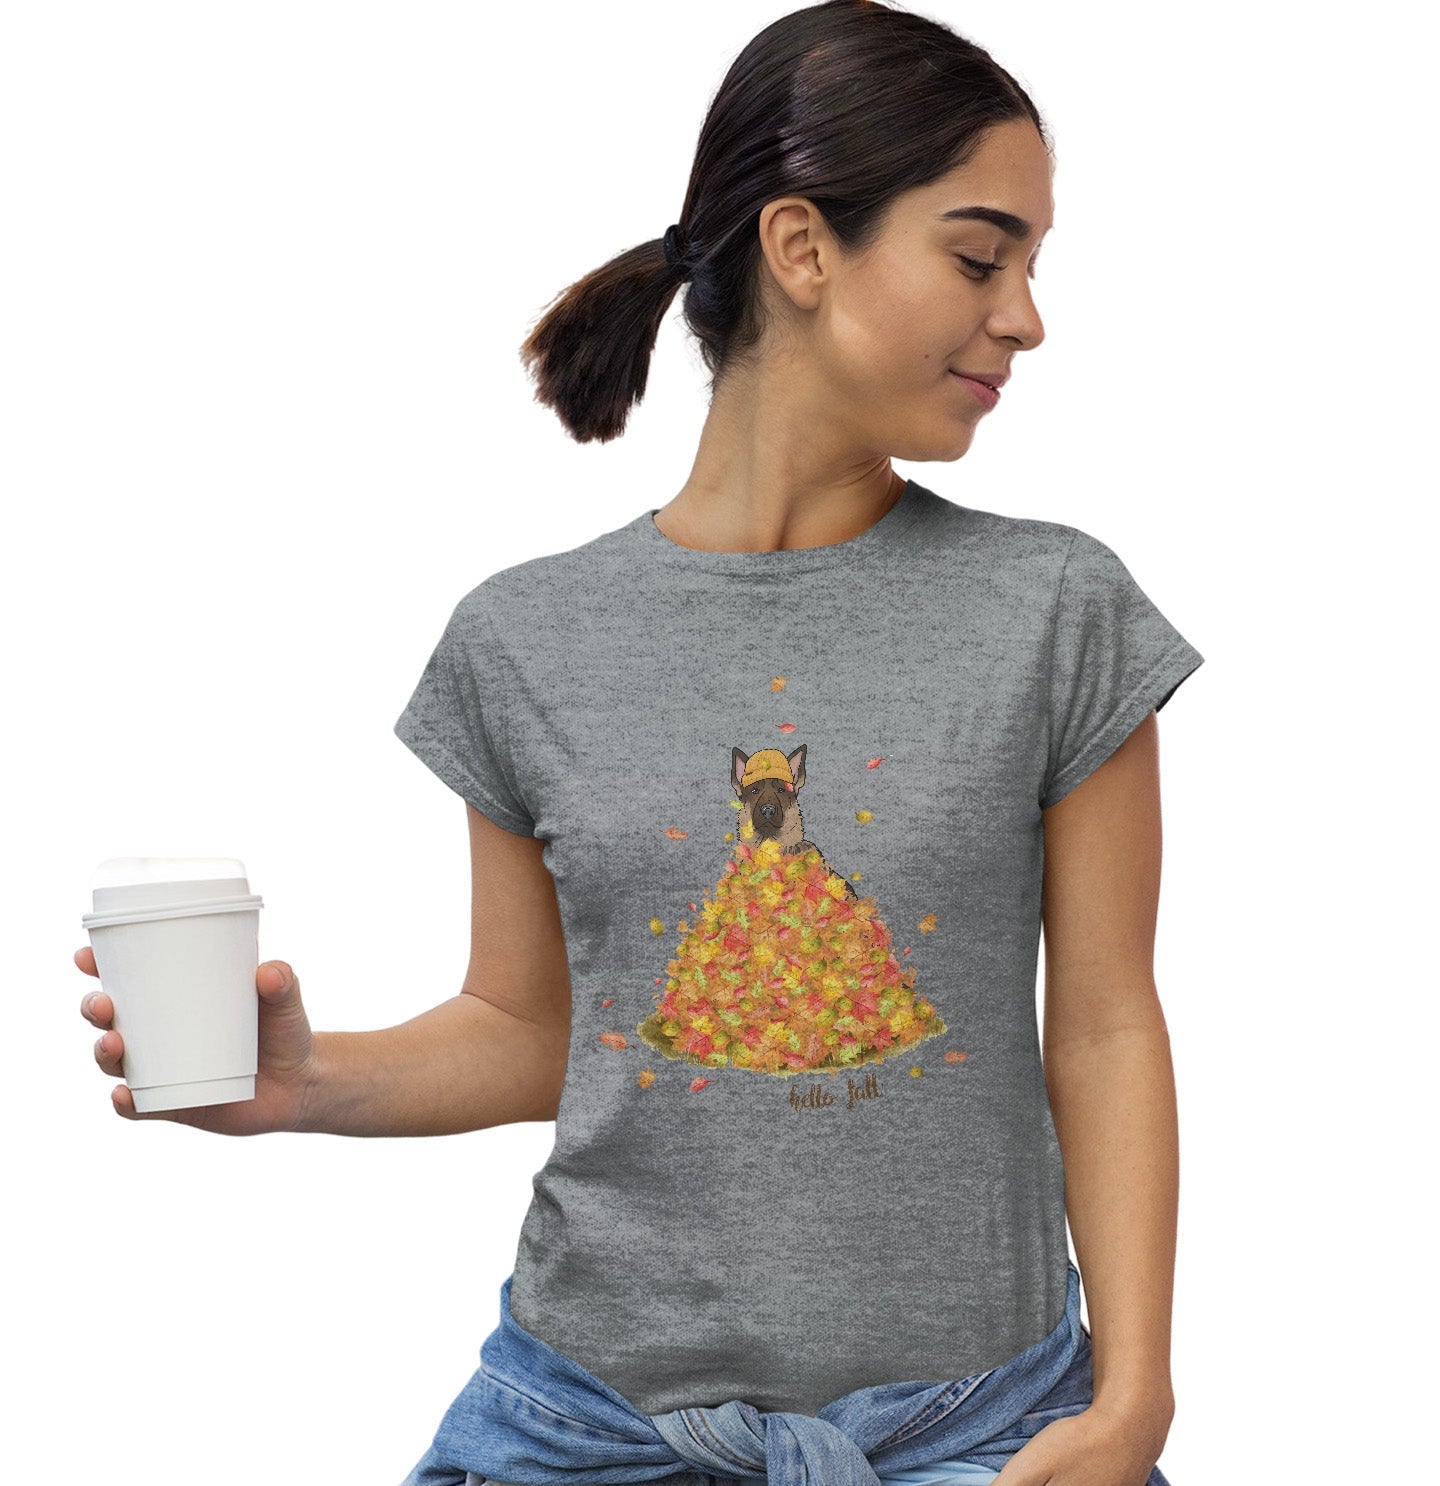 Leaf Pile and German Shepherd - Women's Fitted T-Shirt